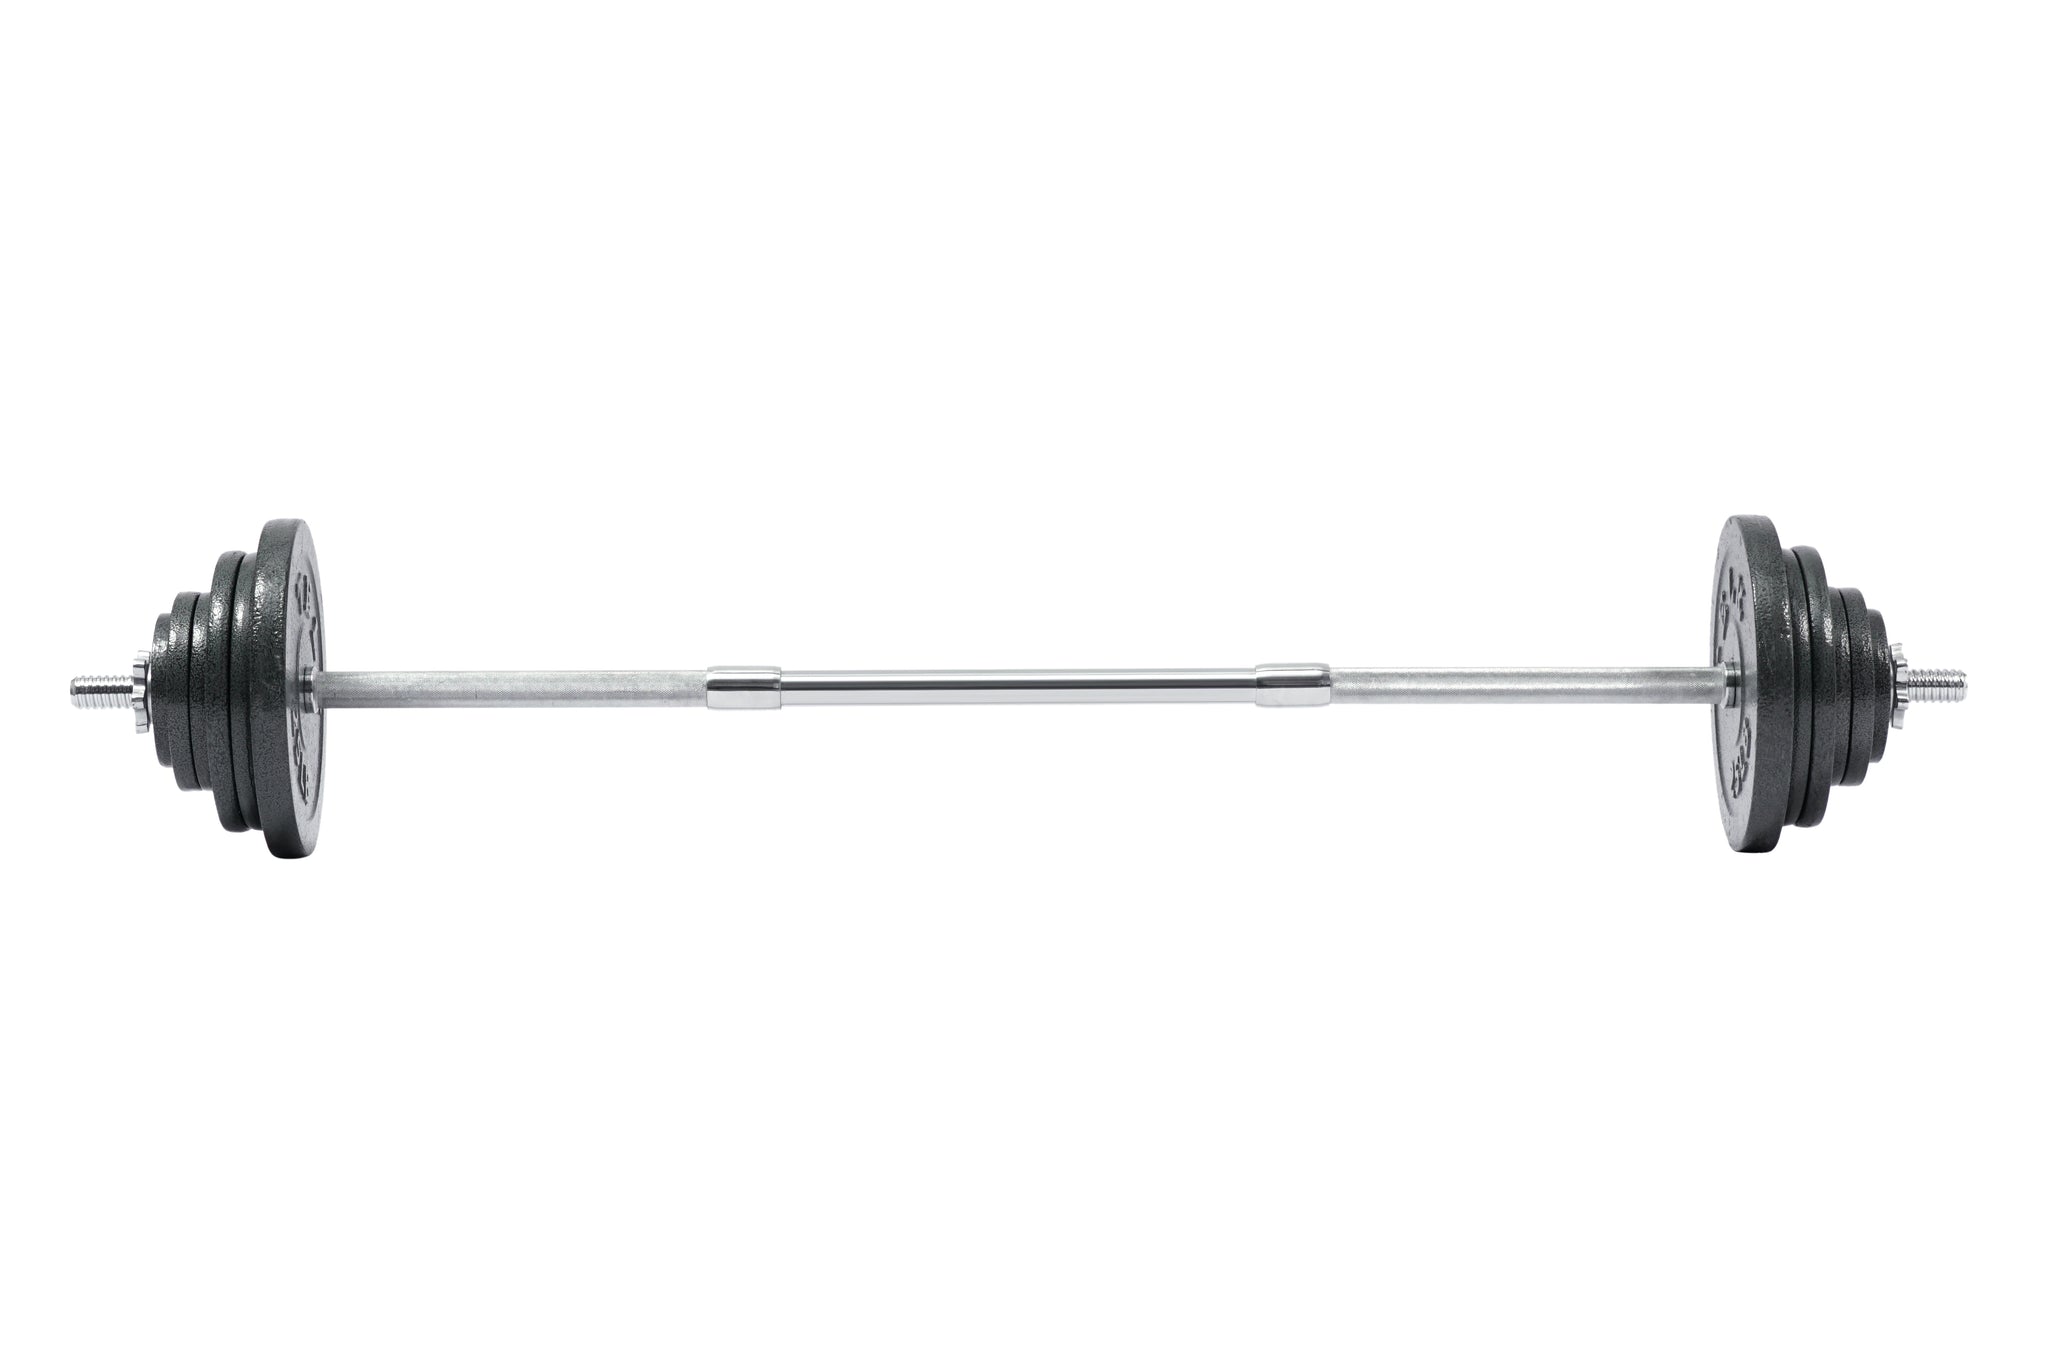 60" Chrome-Finished Barbell  chrome-finished surface not only exudes a